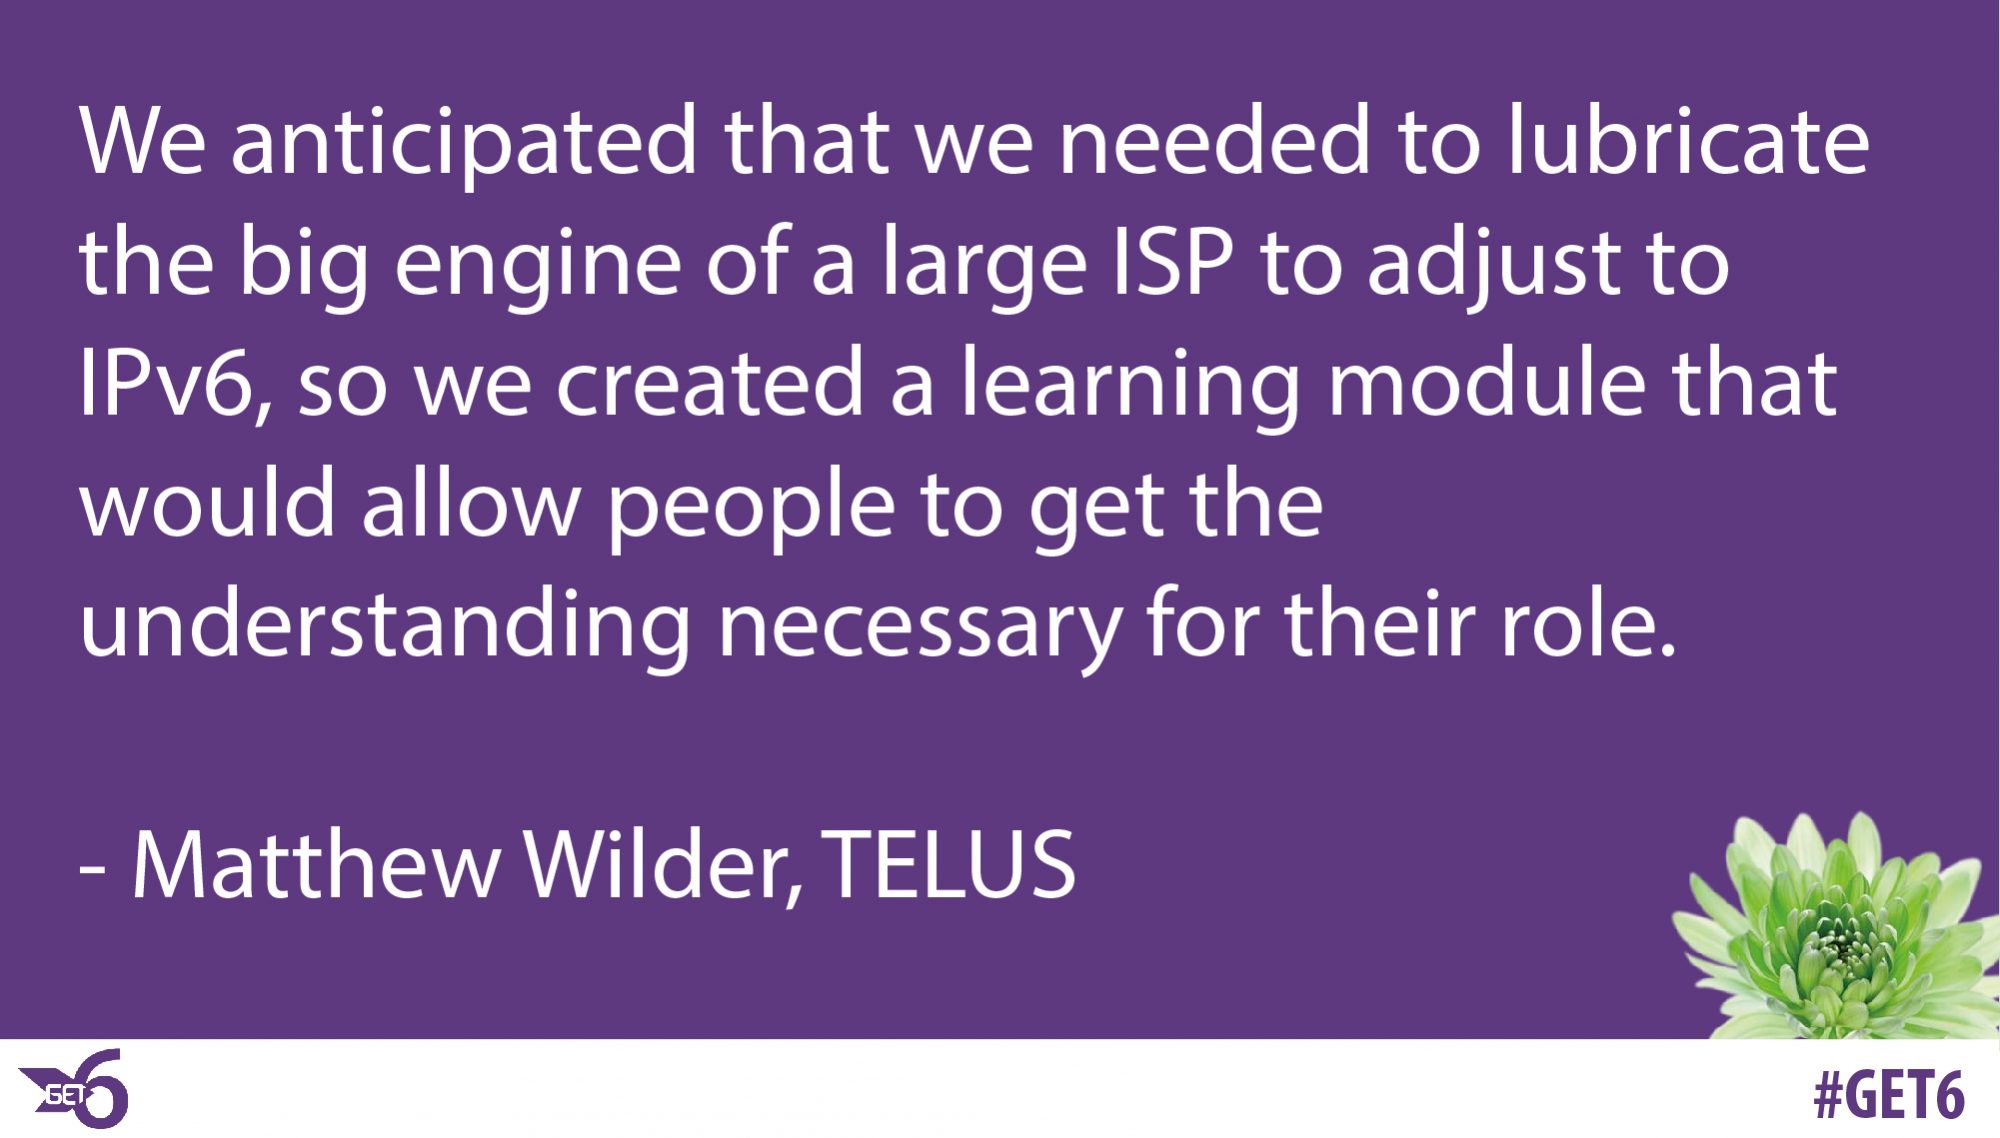 “We anticipated that we needed to lubricate the big engine of a large ISP to adjust to IPv6, so we created a learning module that would allow people to get the understanding necessary for their role.”